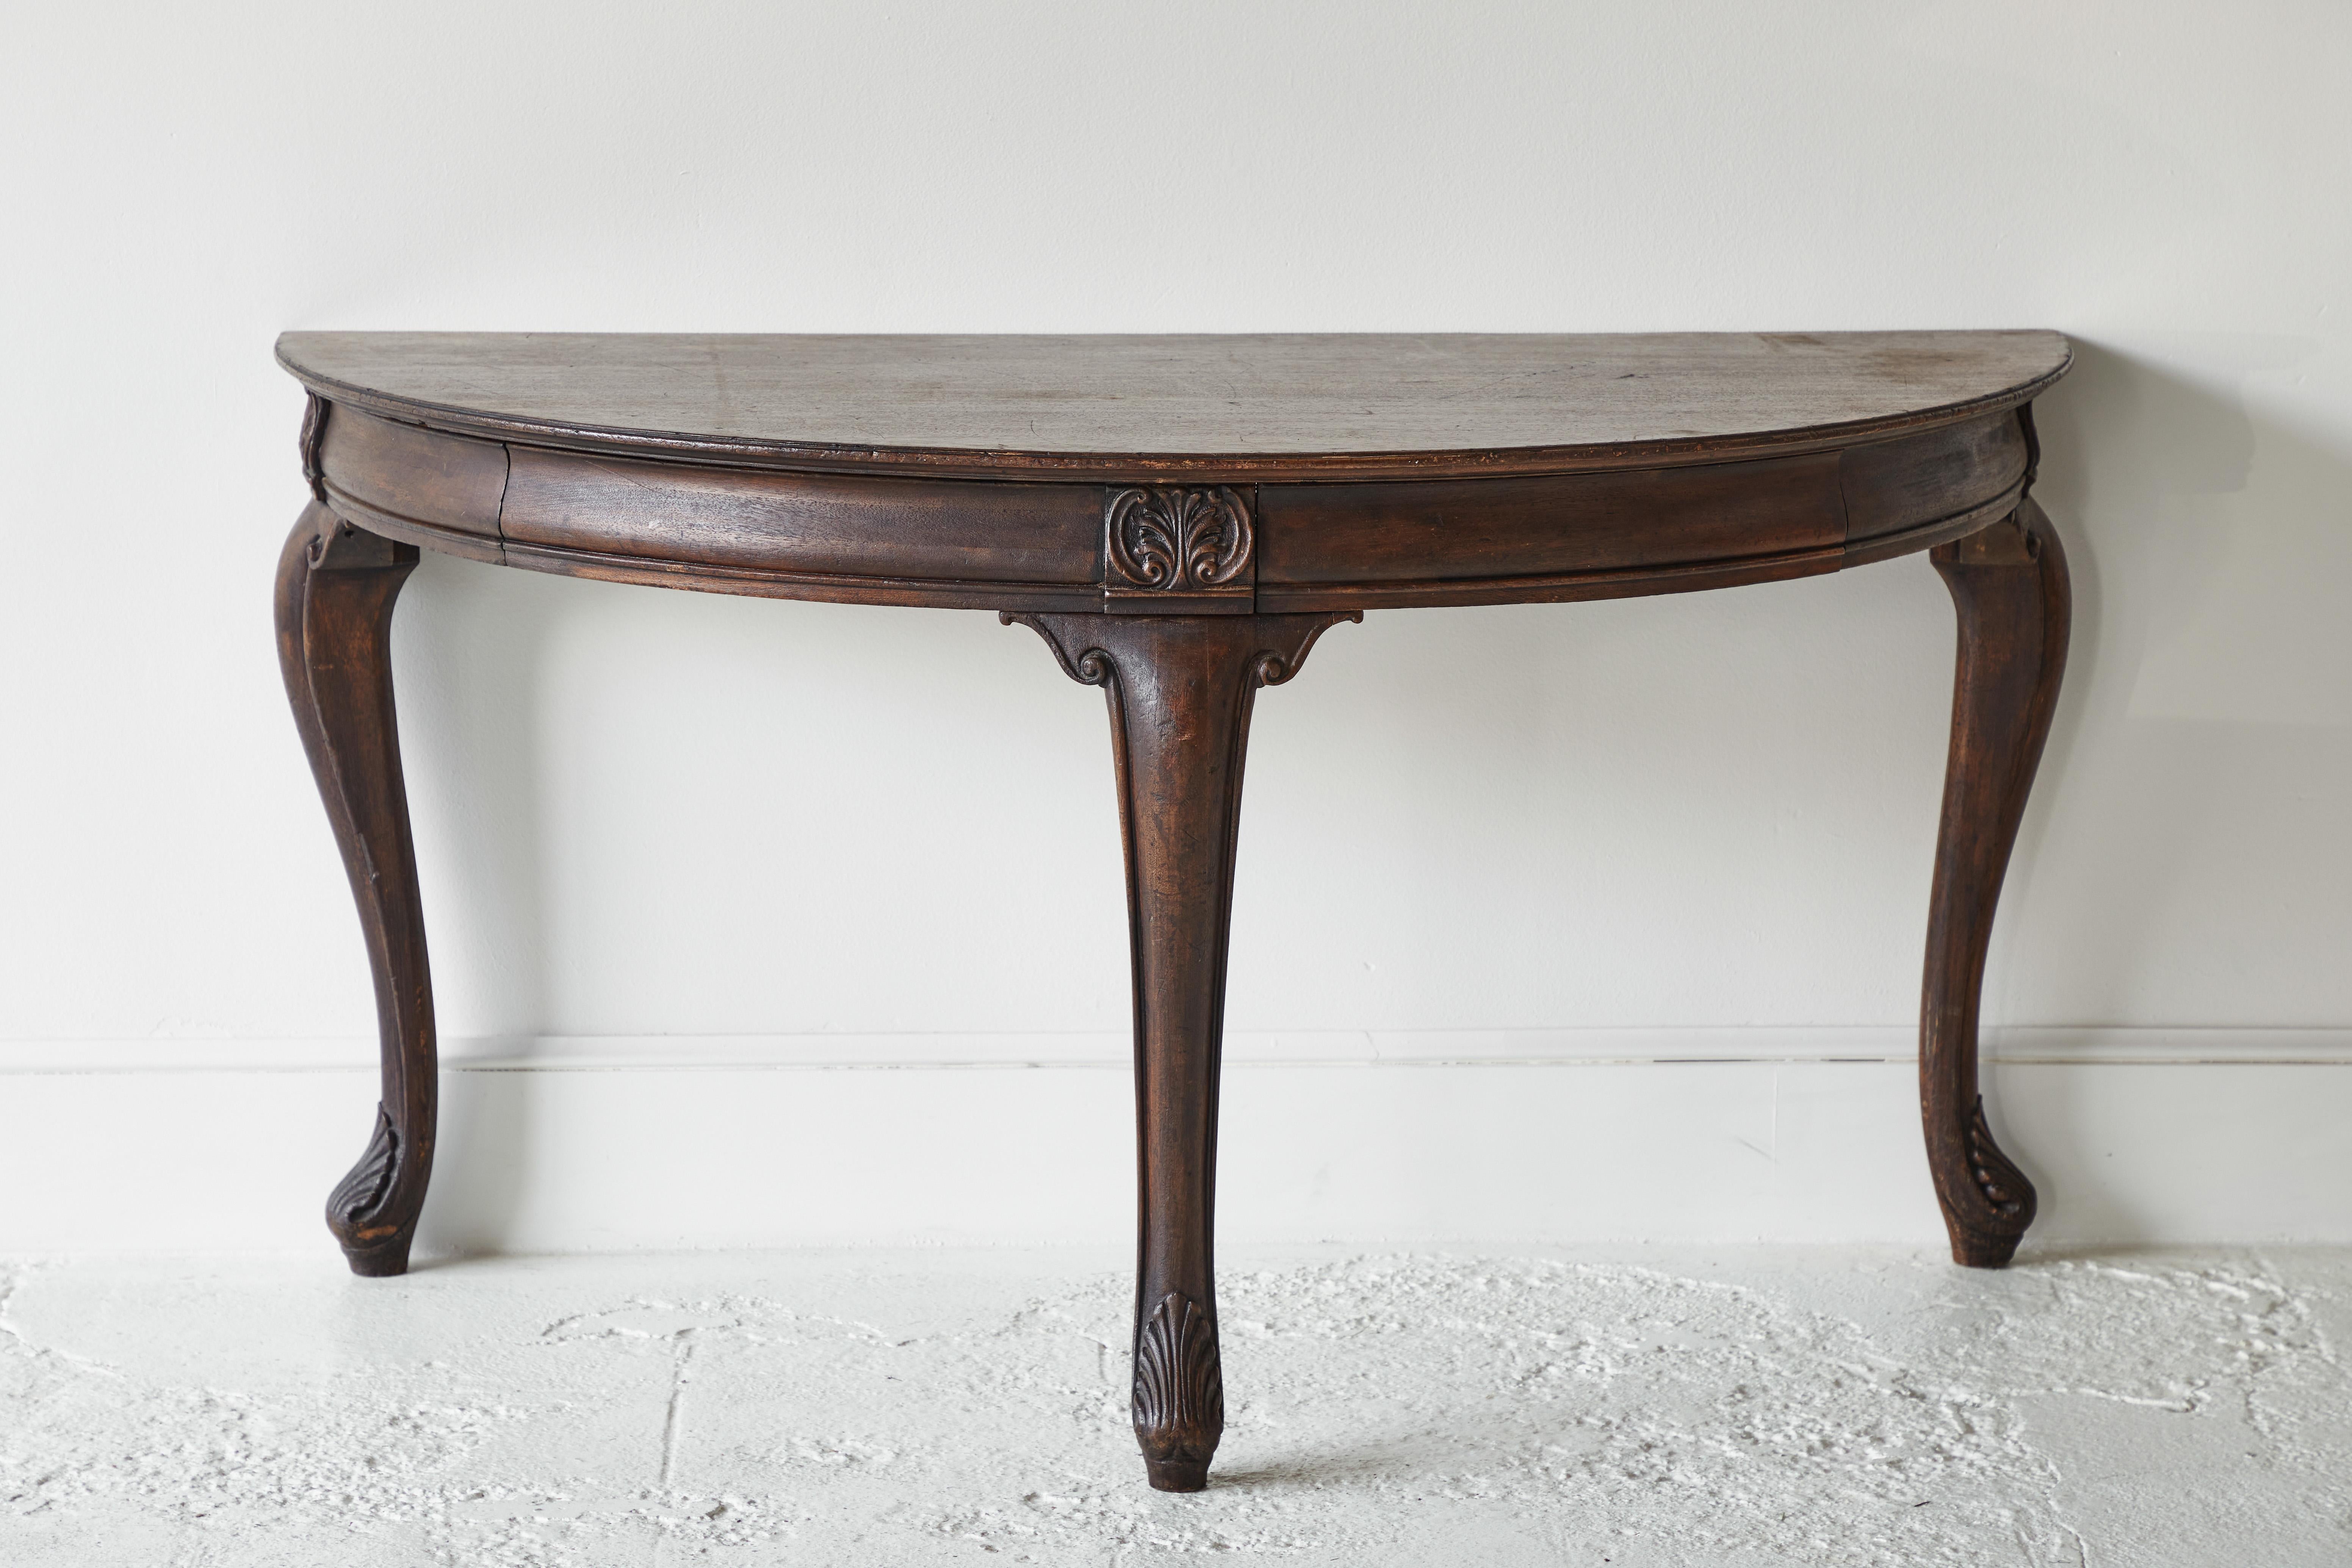 Early American demilune table with cabriole legs and ornate detail along the apron.